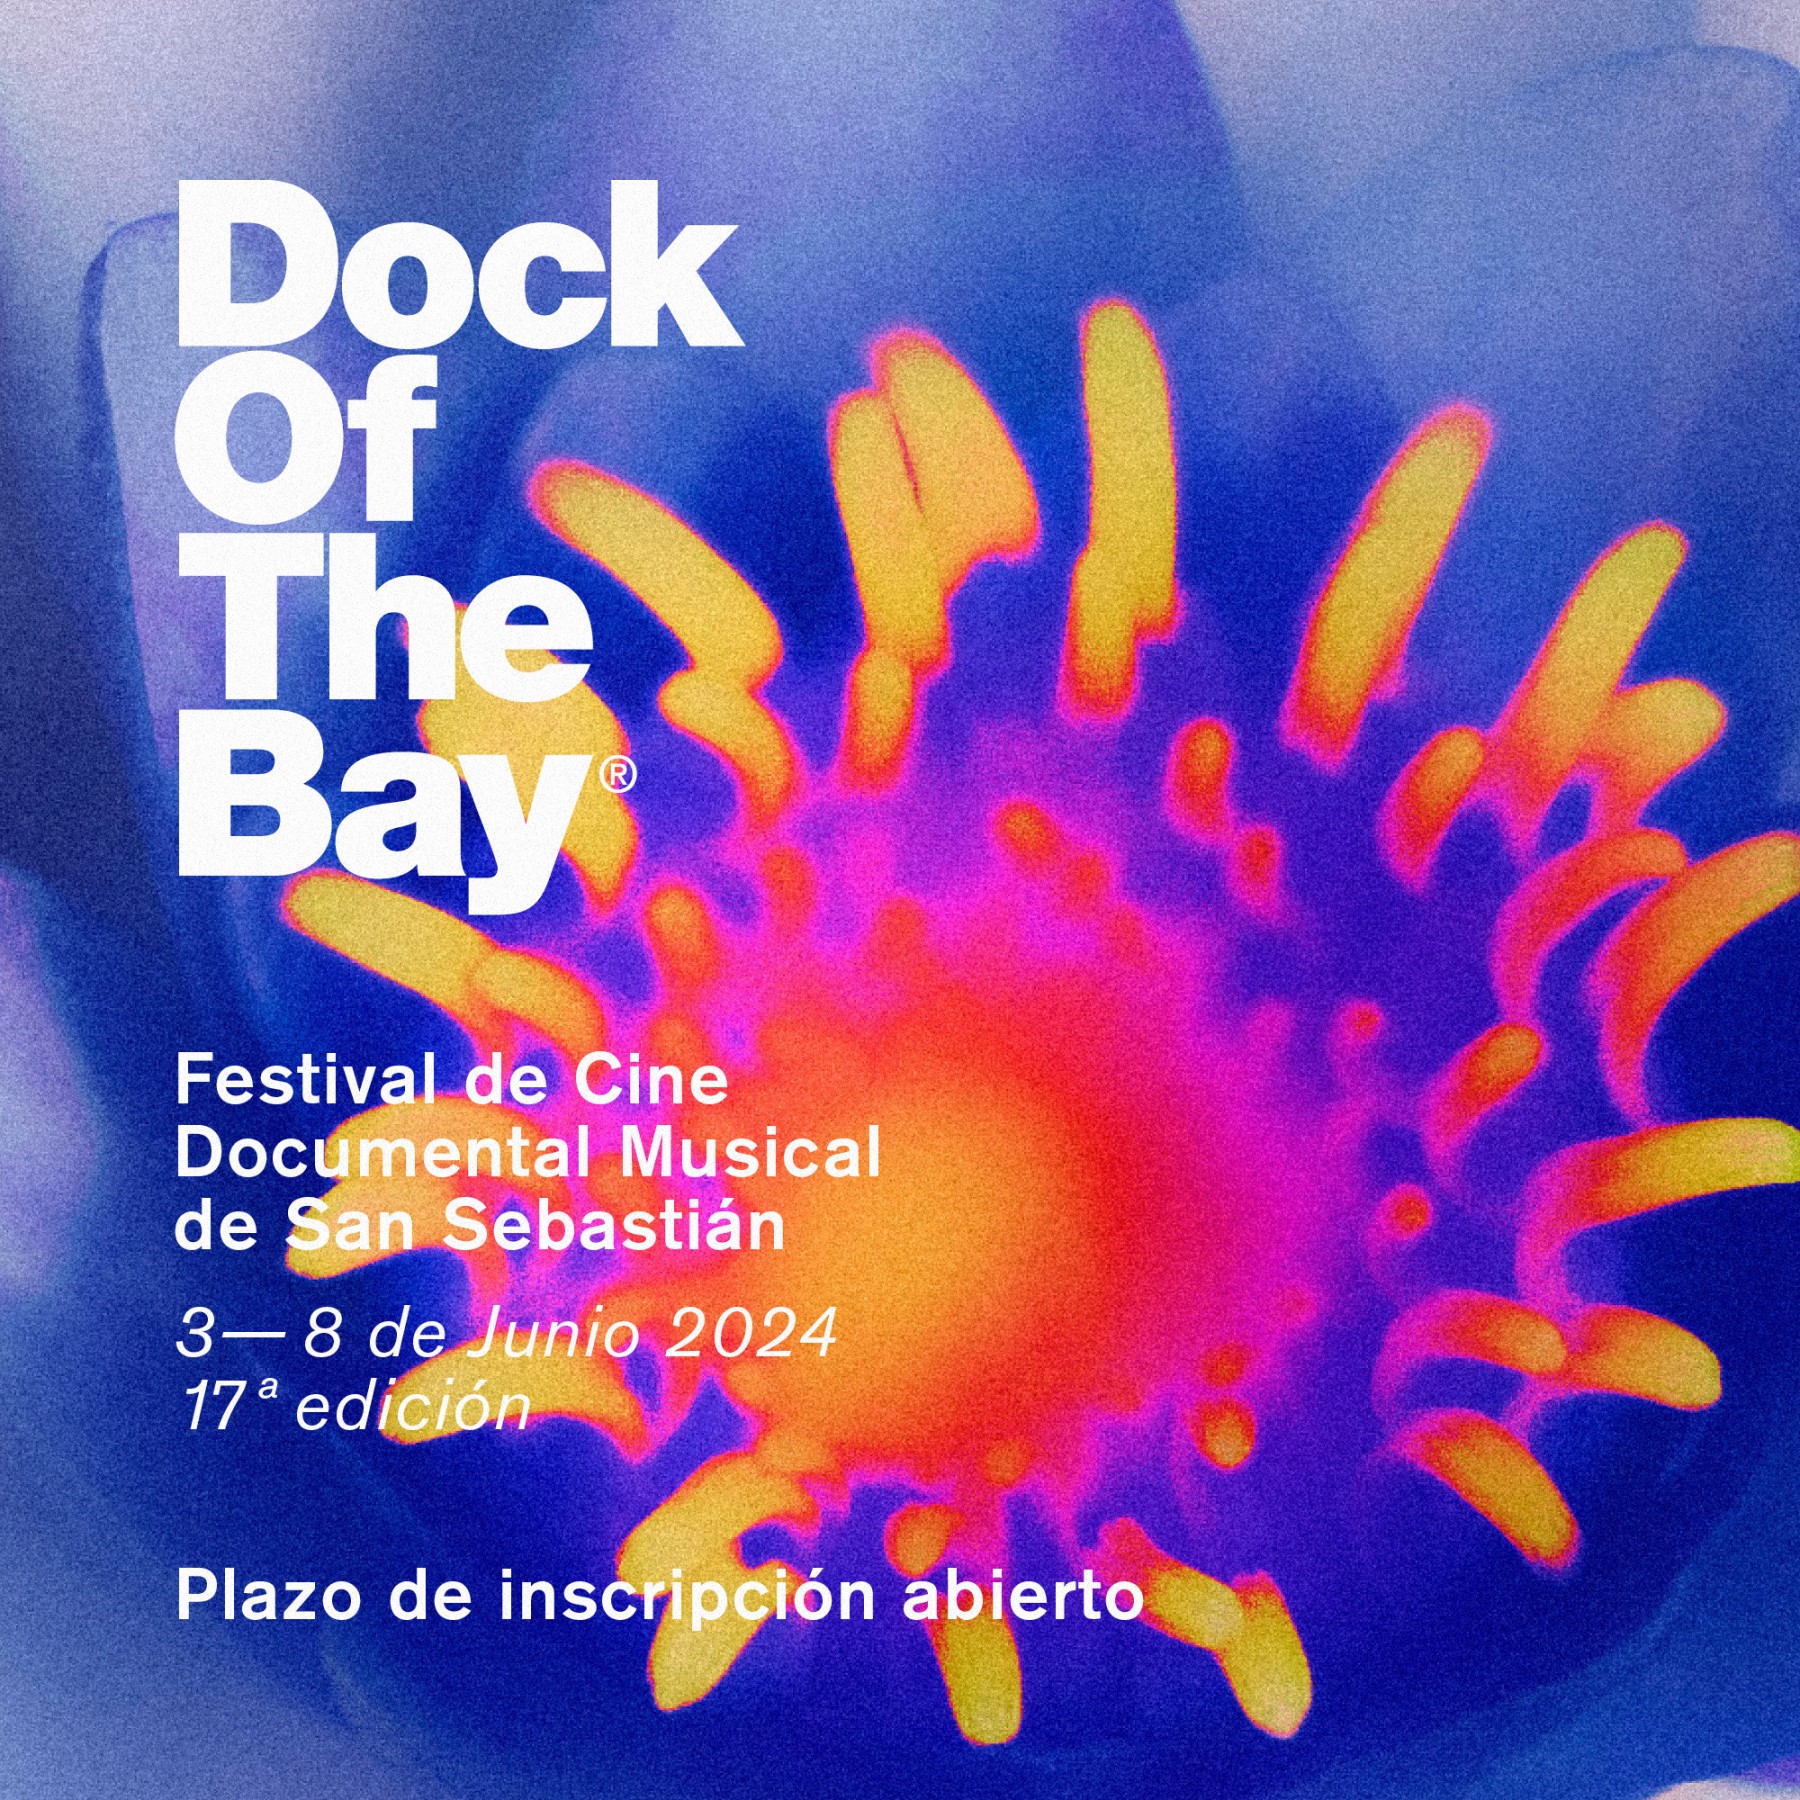 The Dock of the Bay Musical Documentary Film Festival will be held from June 3rd to 8th, 2024, and is now open for submissions to its official sections.